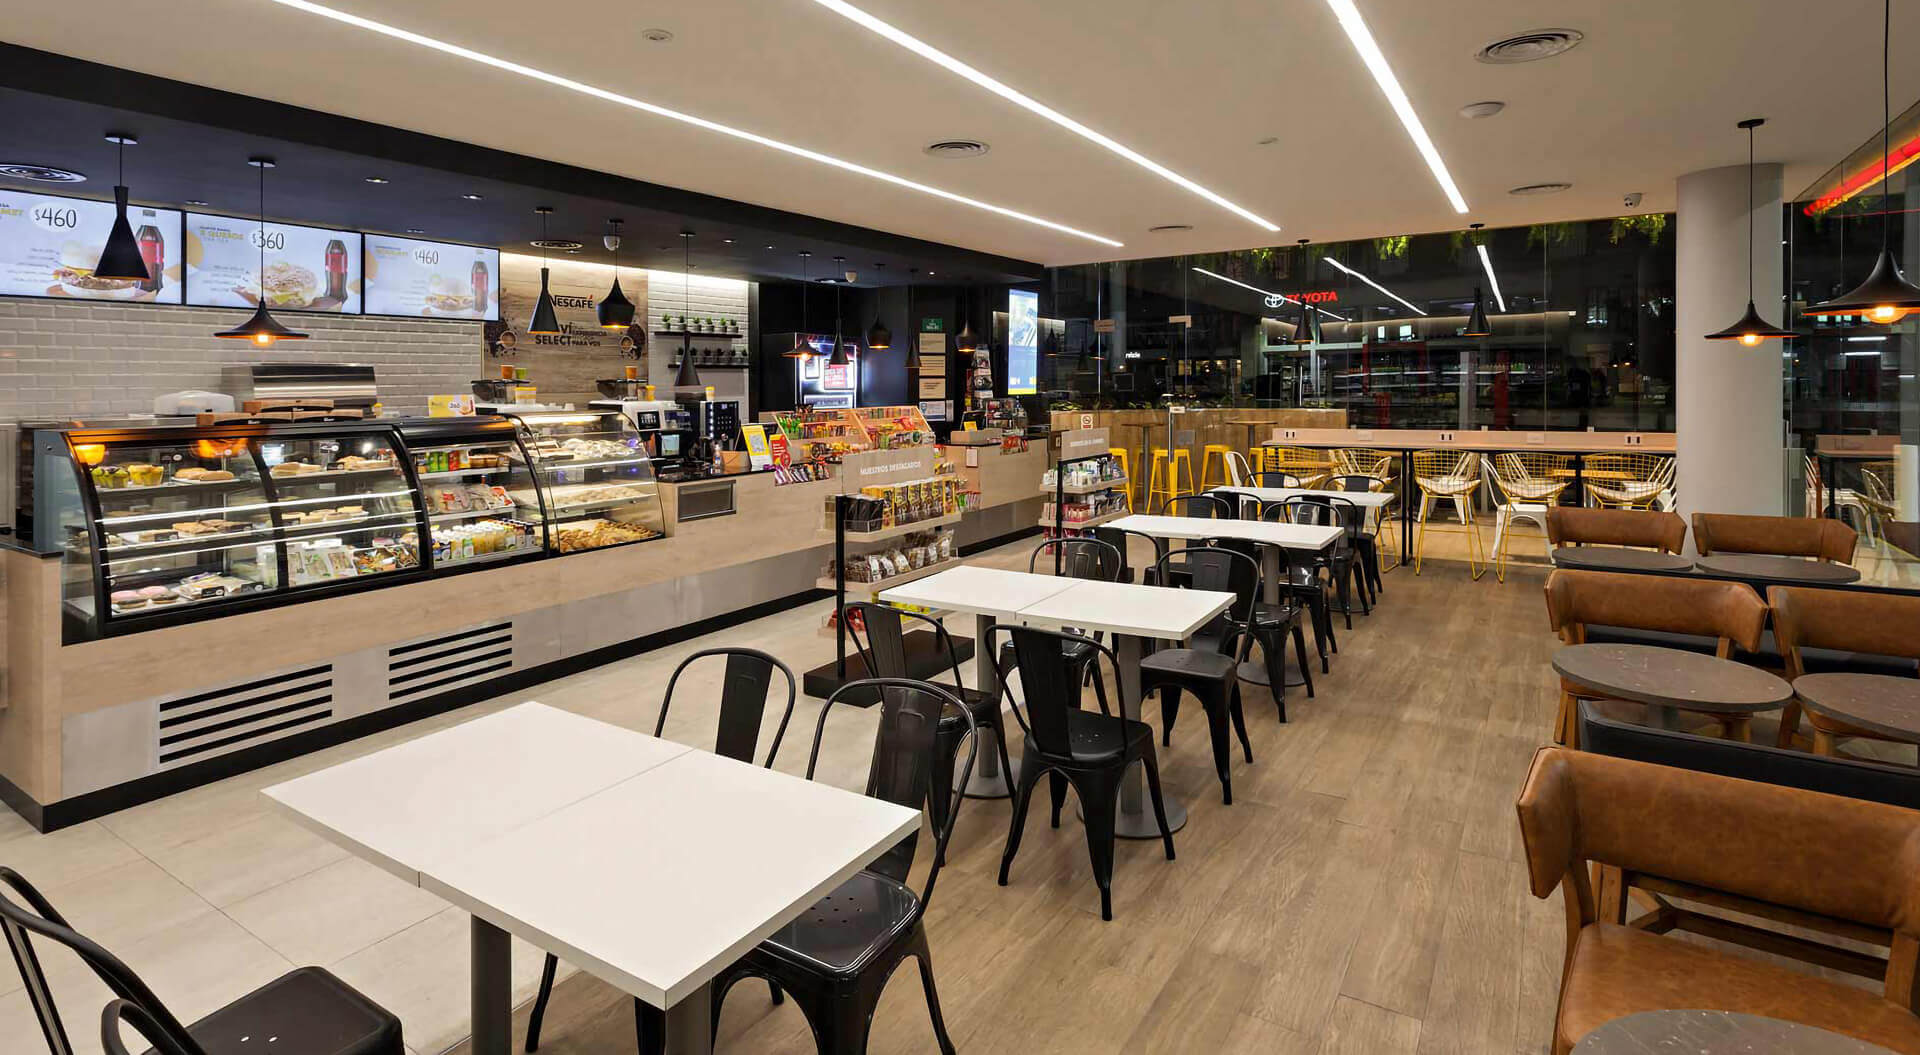 Trending Shell Select Convenience Store Benchmark, Creative Petrol Forecourt Interior Design, Graphic Communications, Argentina - CampbellRigg Agency